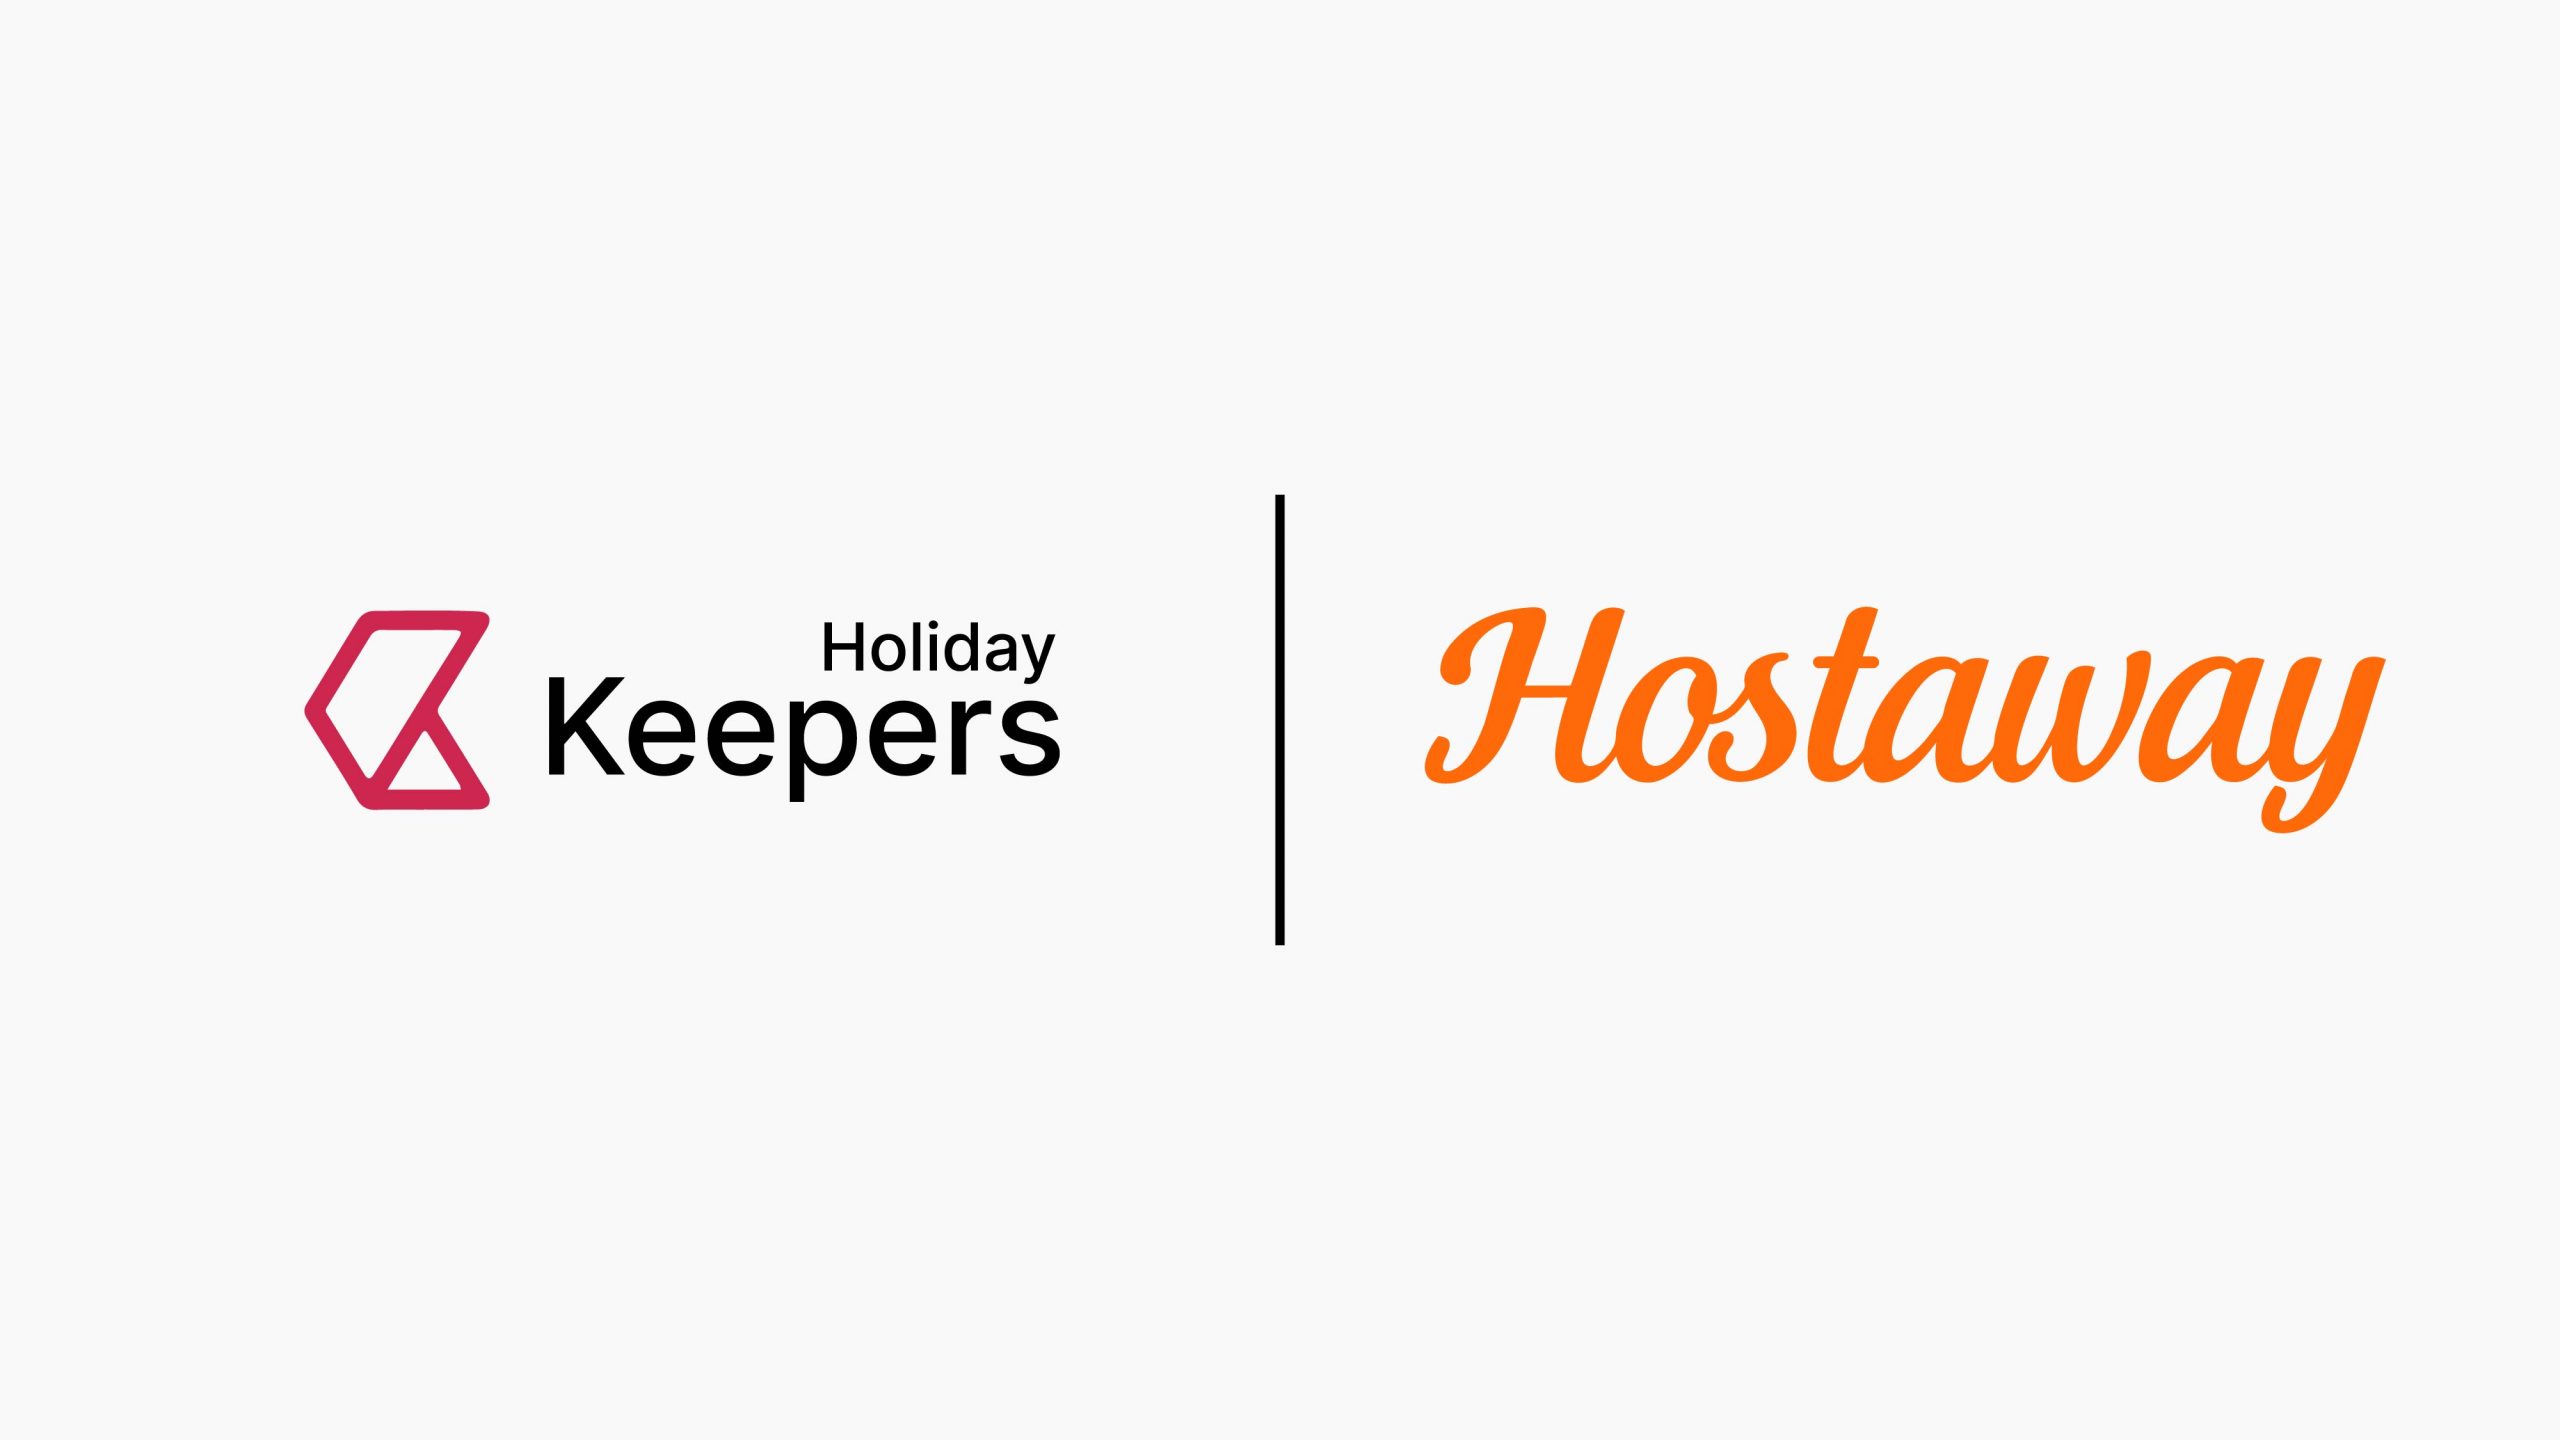 HolidayKeepers Announces Partnership with Hostaway